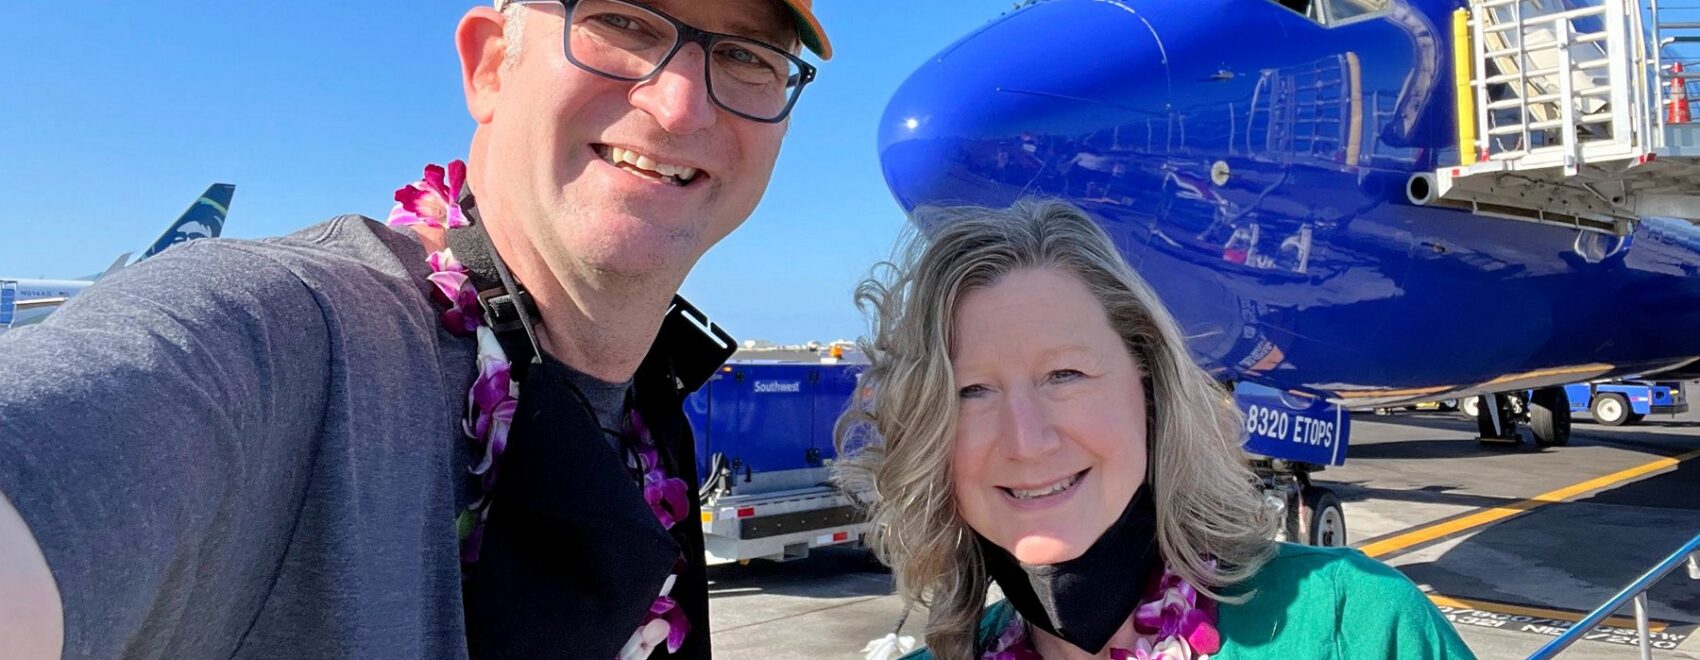 Zuzu and Ross in front of Southwest Airplane thanks to Companion Pass Free Flights